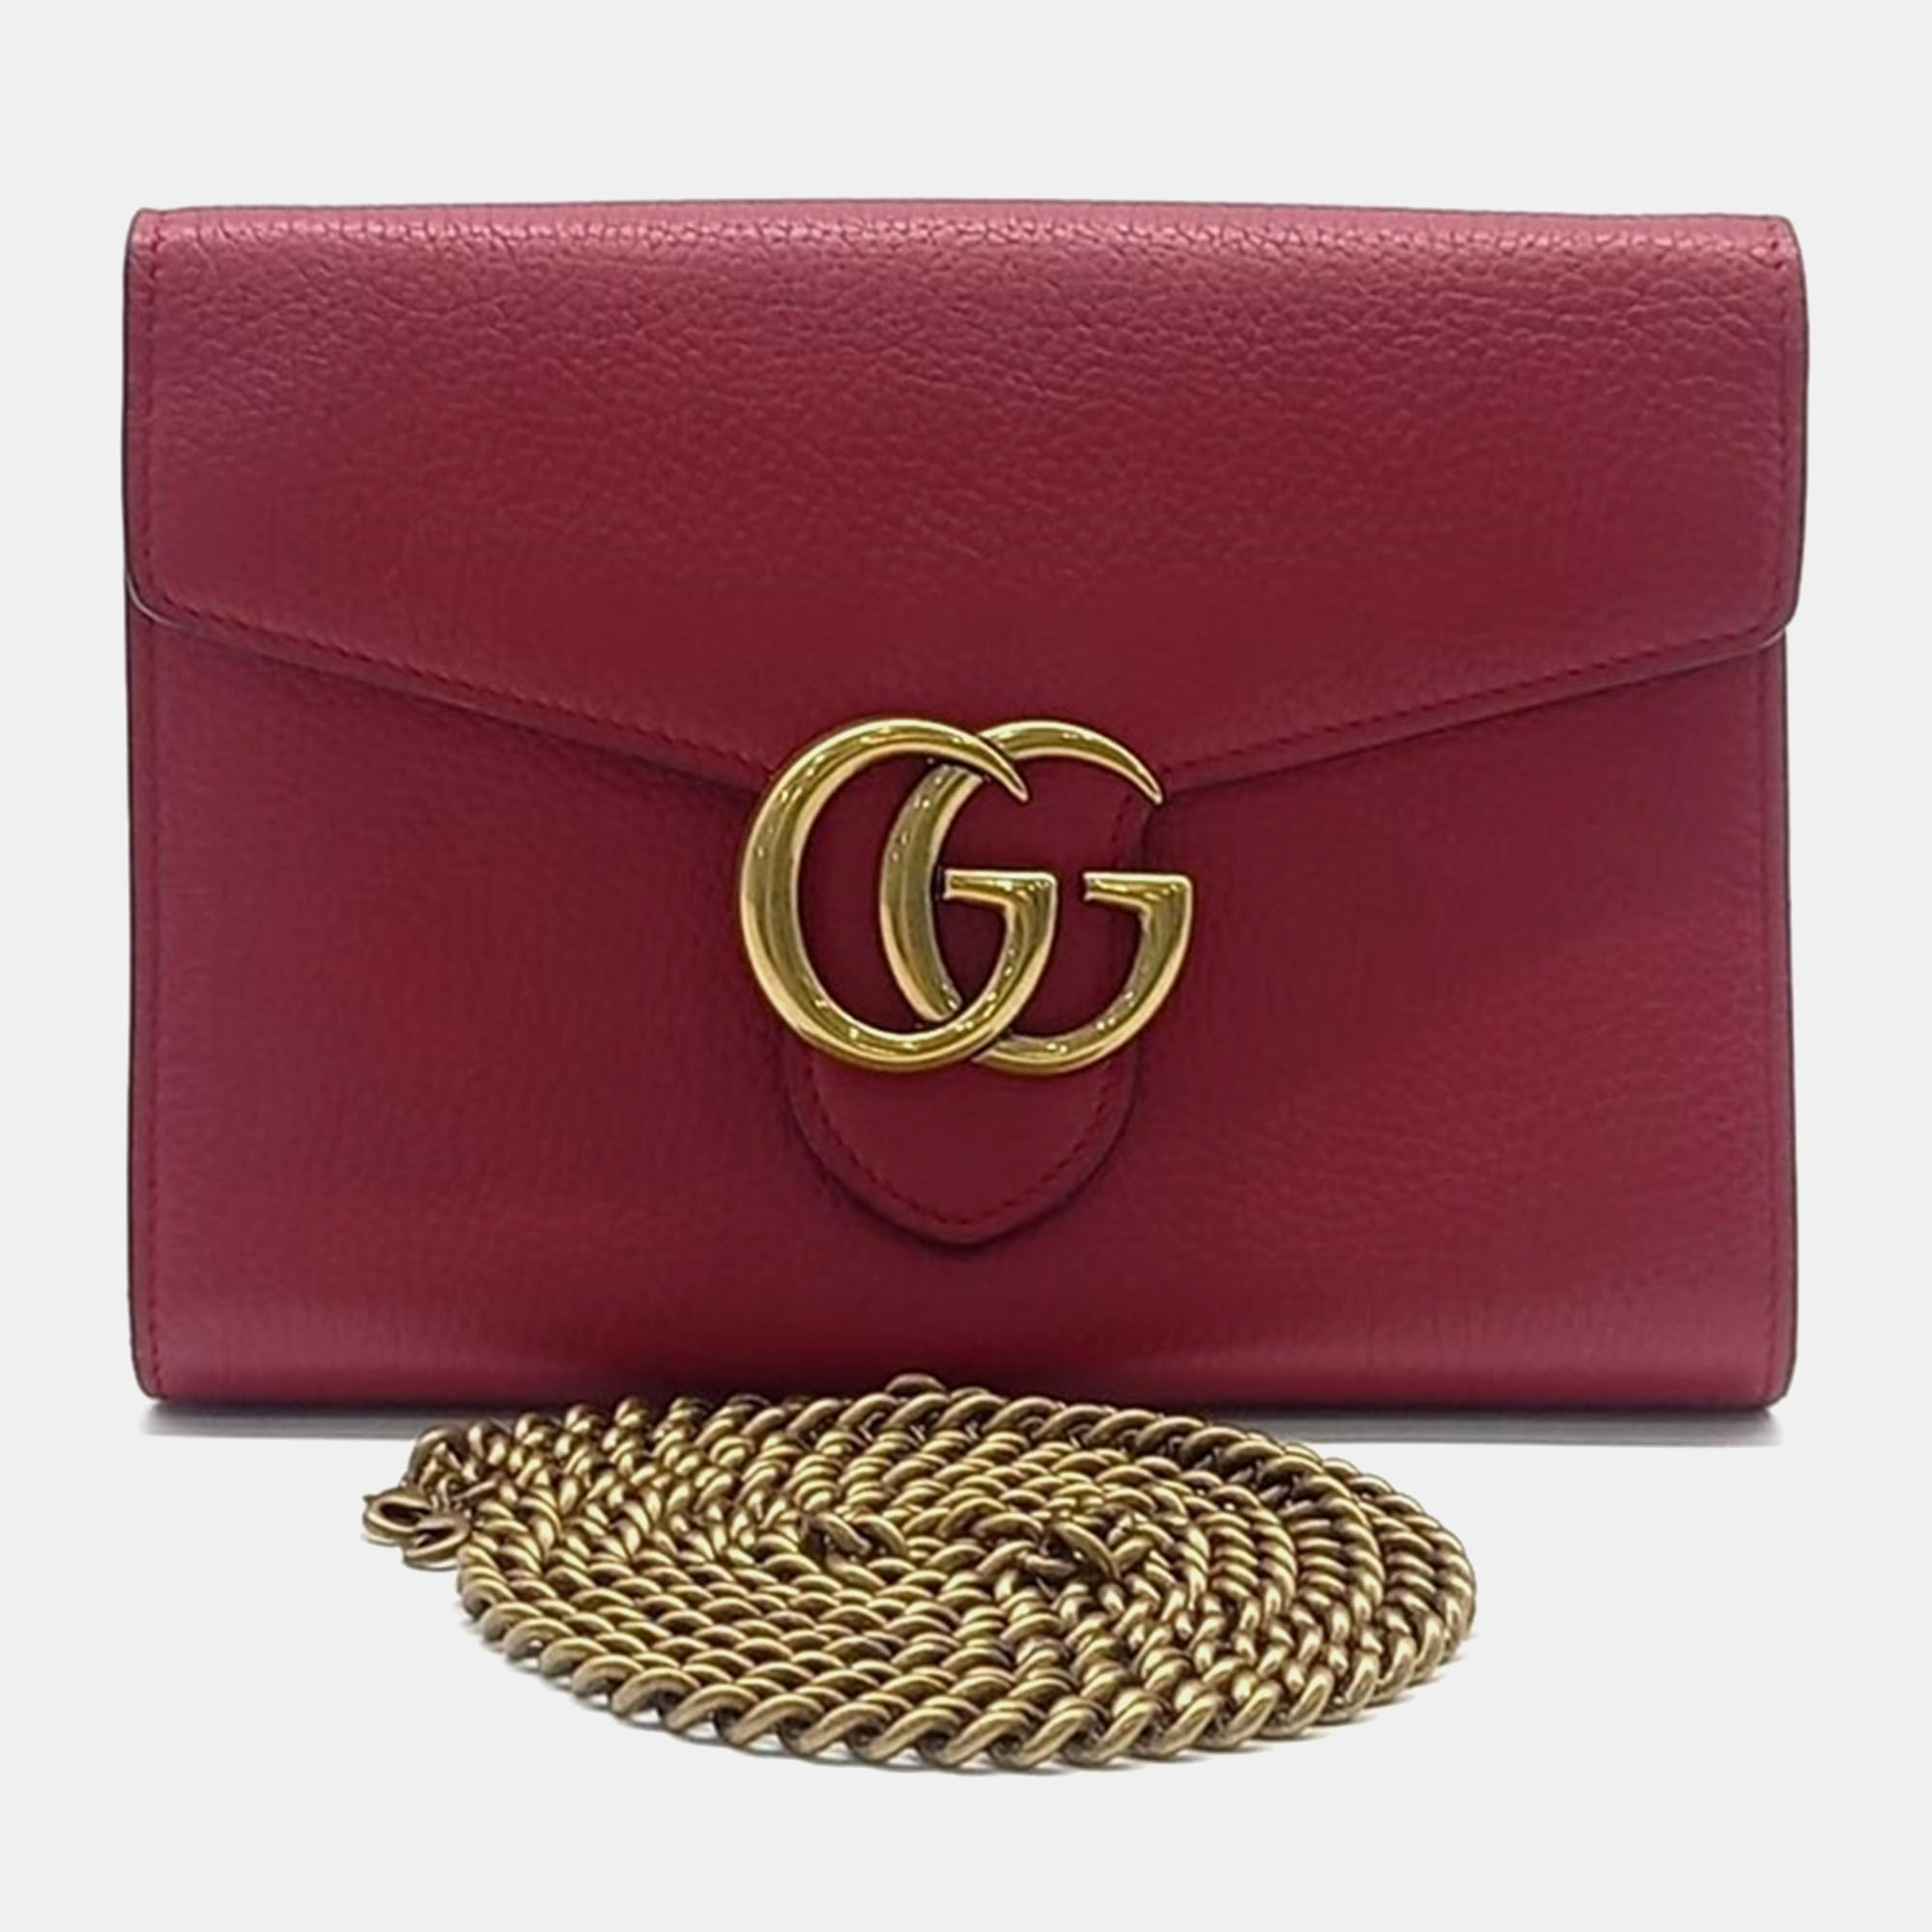 

Gucci Marmont Chain Crossbody Bag, Red